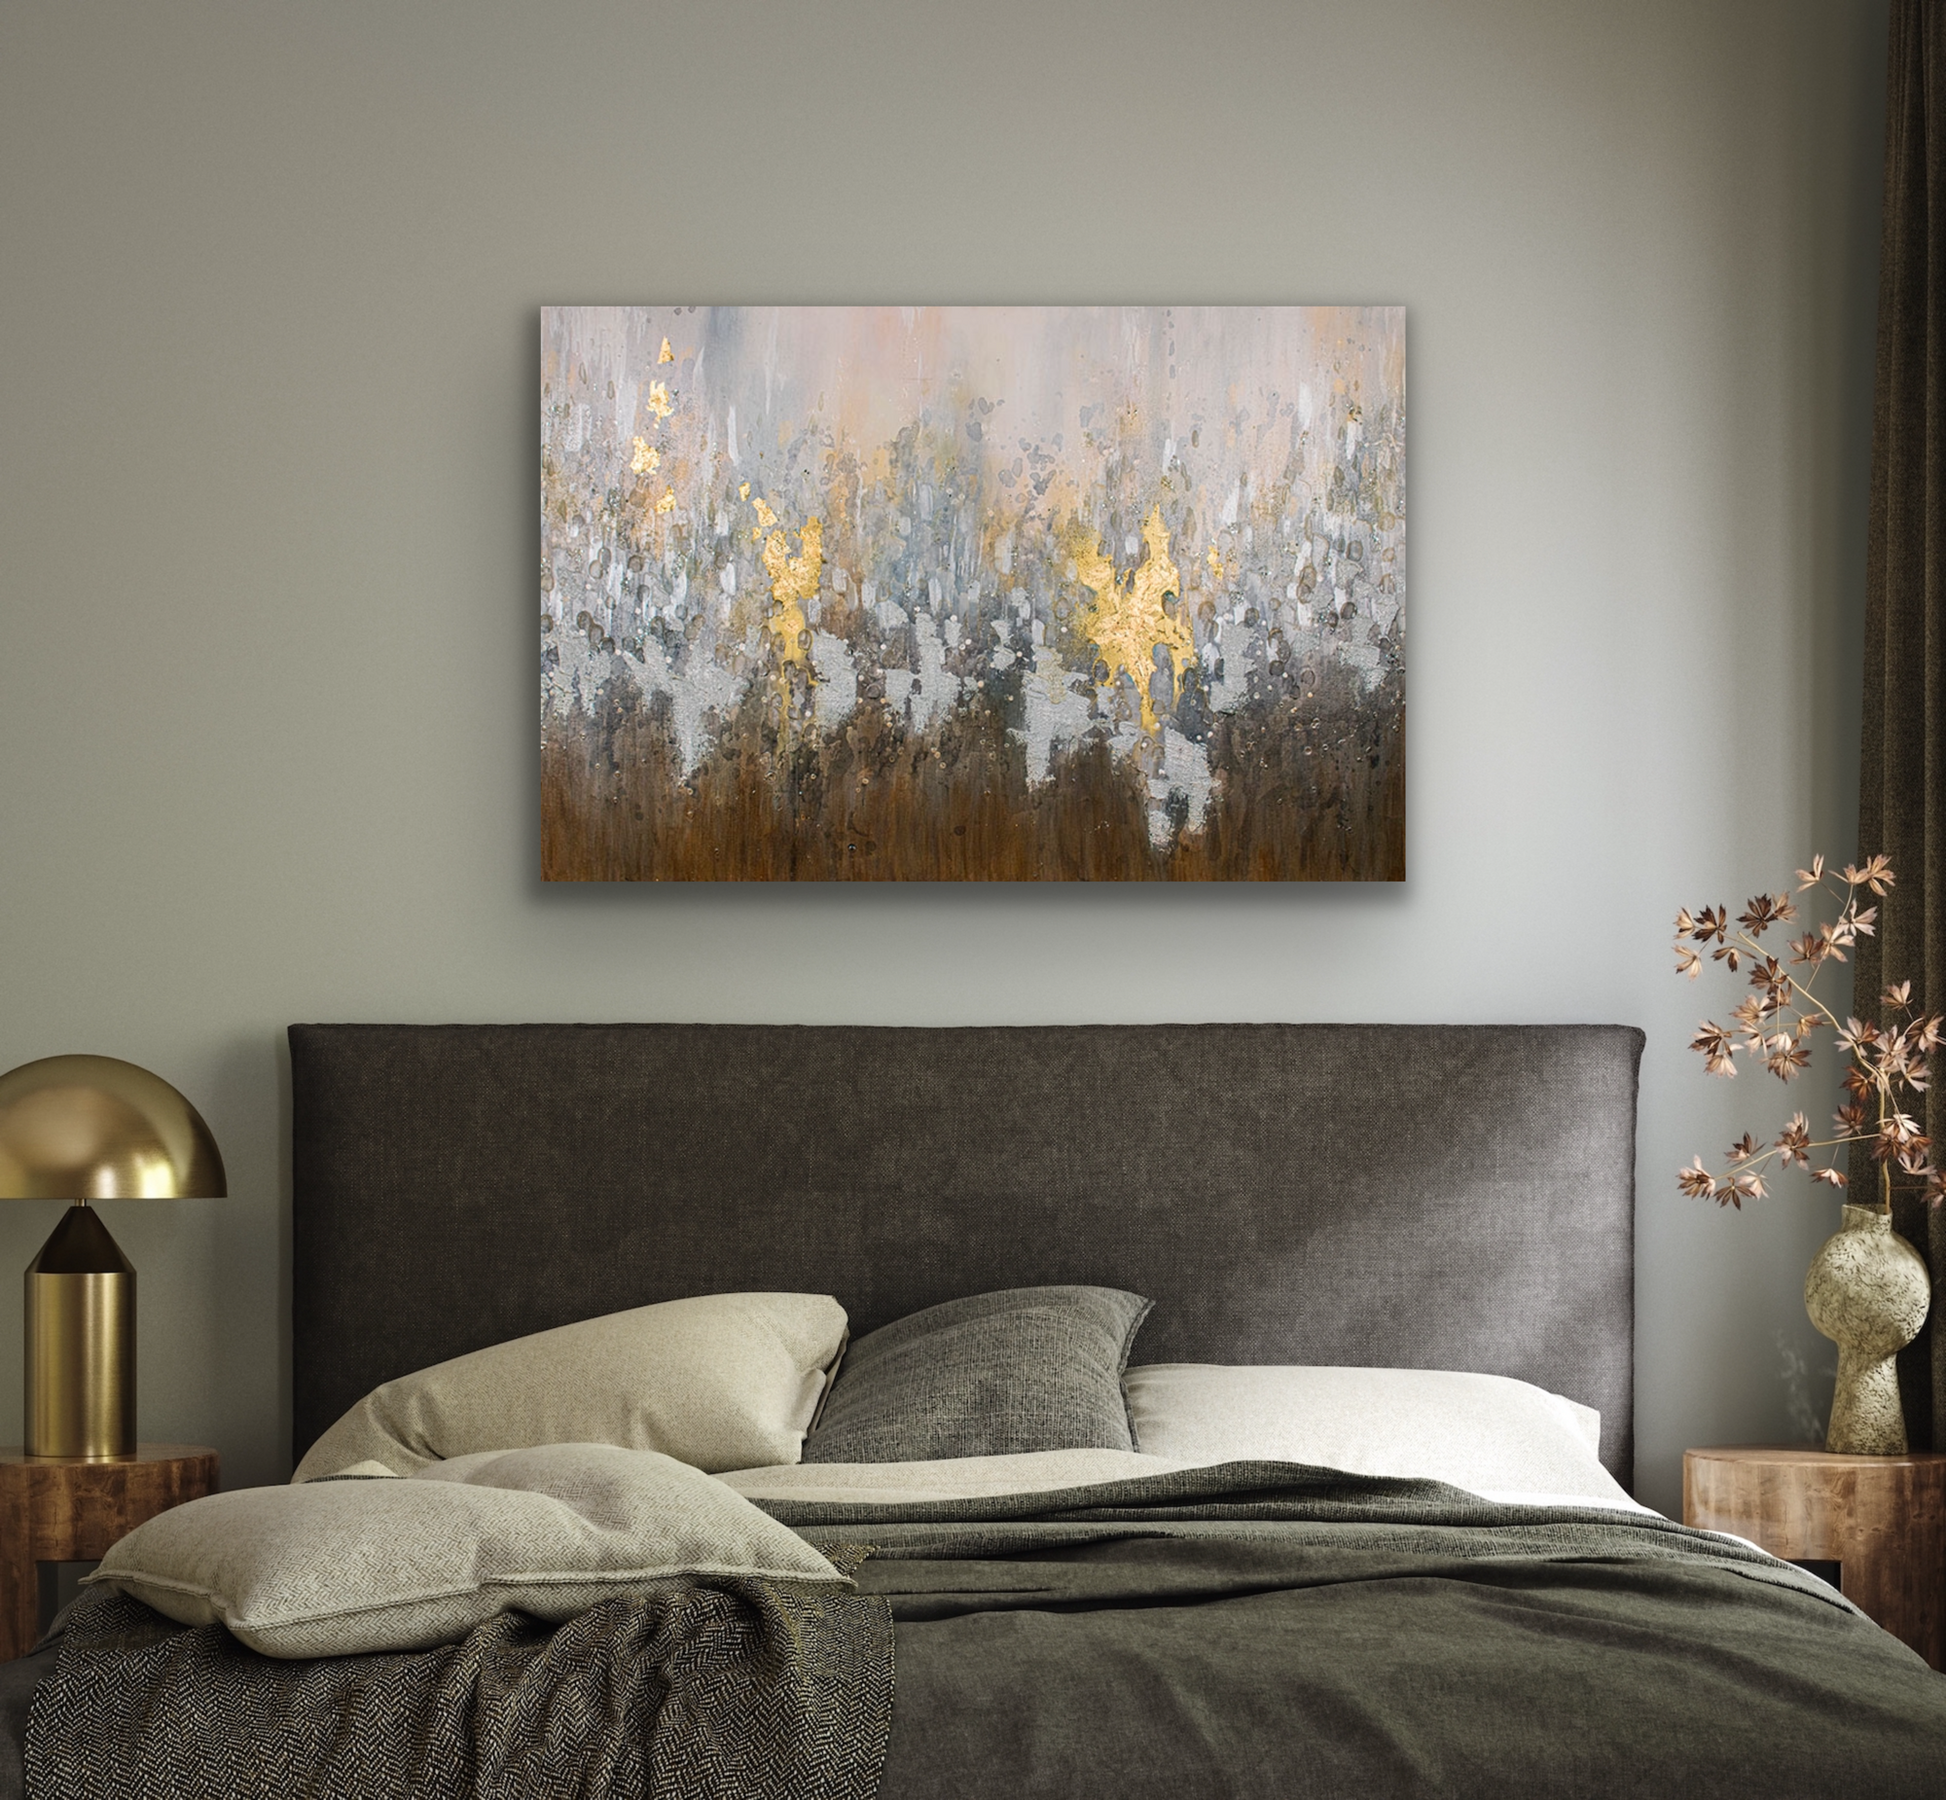 This abstract work of art comes in five different canvas print sizes. The colours of this art work include gold, grey, silver, brown and a little orange.